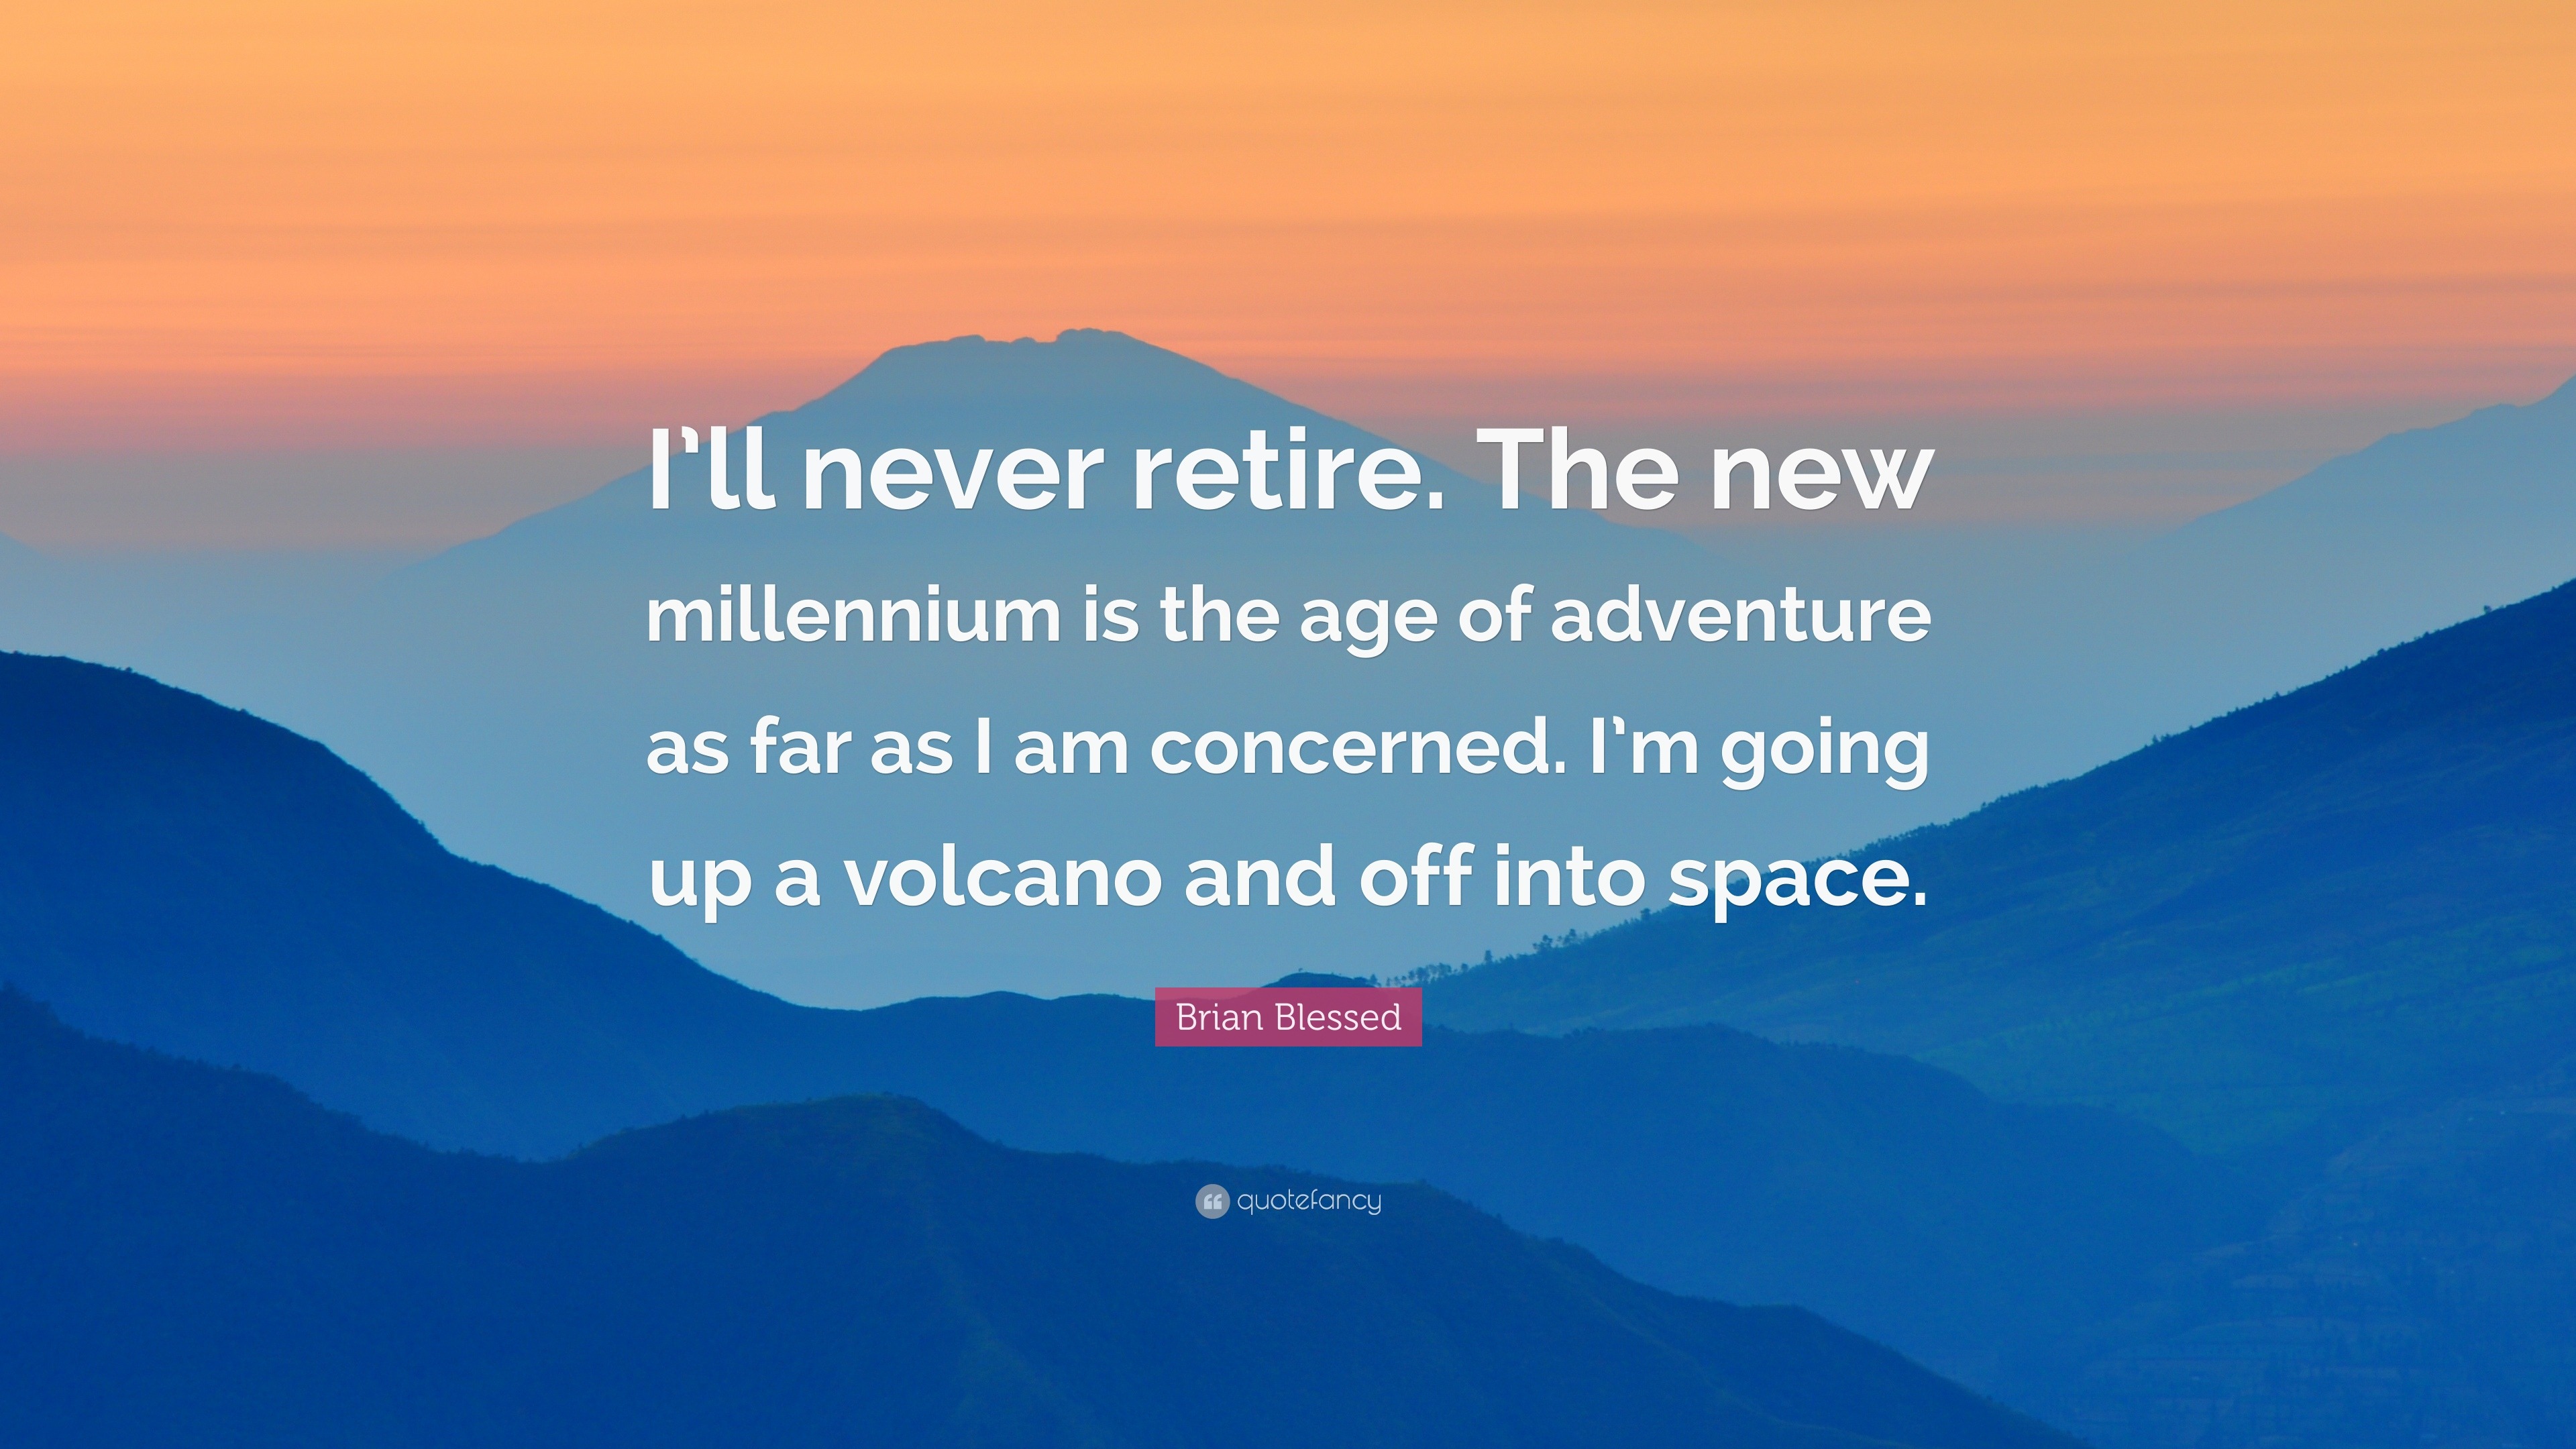 Brian Blessed Quote: “I'll never retire. The new millennium is the age of  adventure as far as I am concerned. I'm going up a volcano and off i”